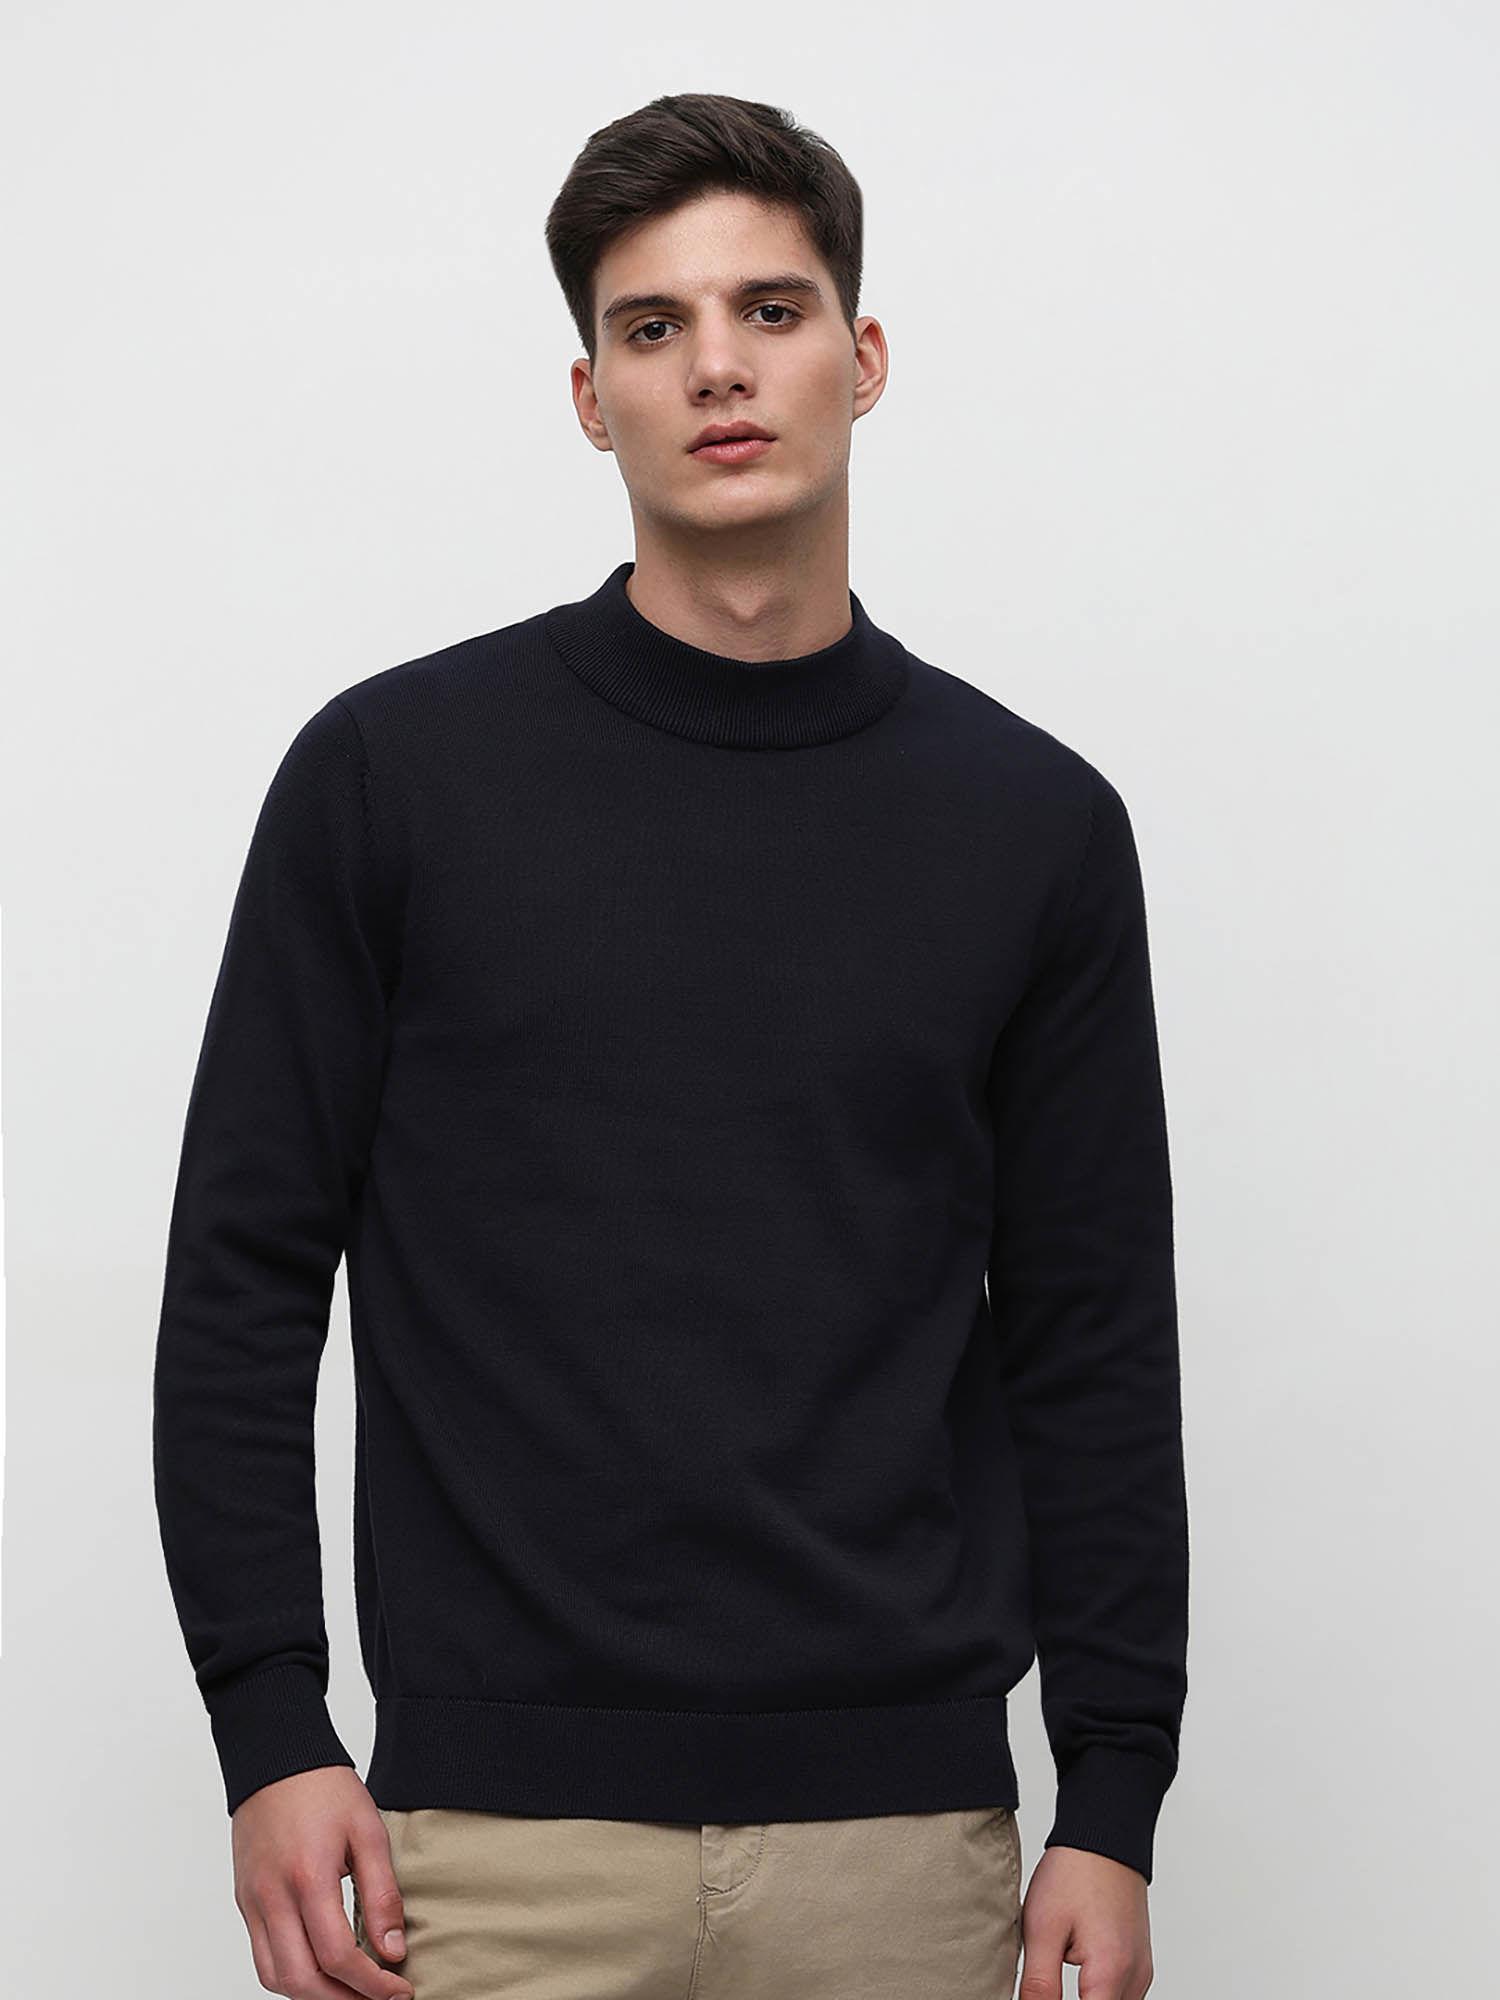 navy blue knitted pullover